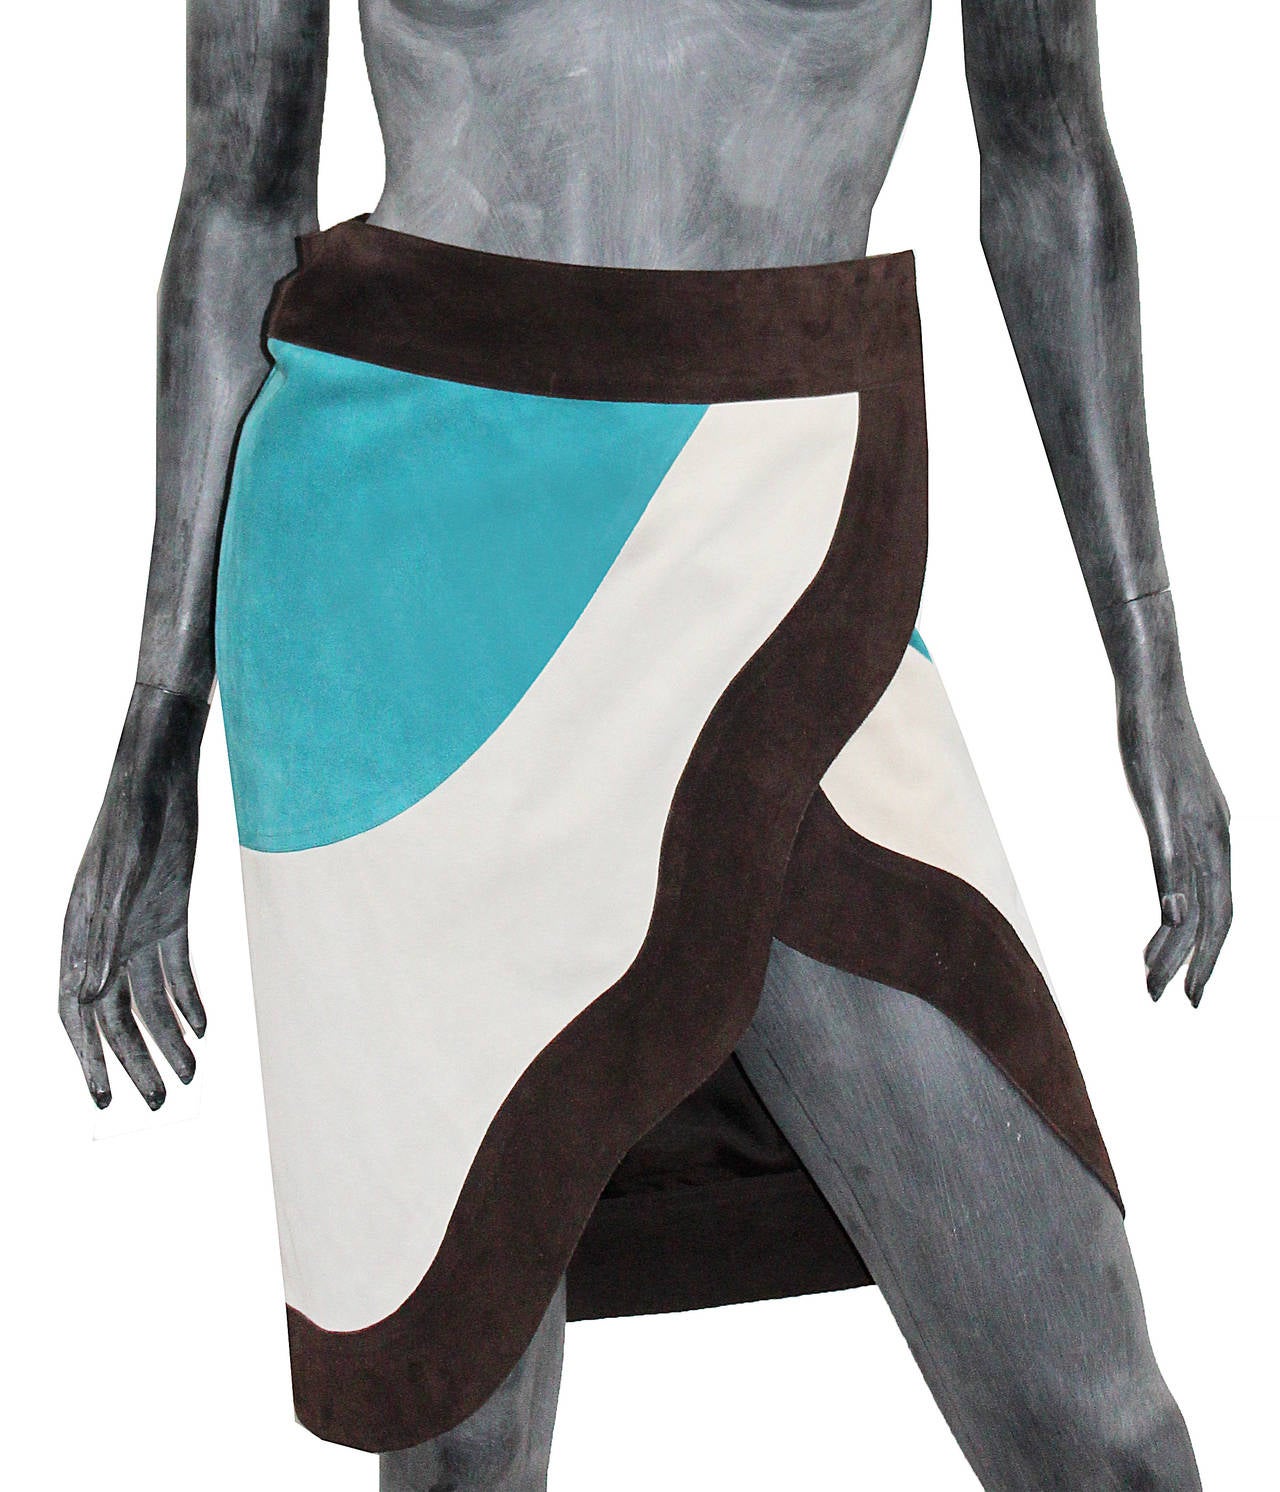 Vintage Yves Saint Laurent wrap skirt with colour block design. The dress wraps around the waist with a button and snap closure and has a leg slit. 

Label reads: 'The garment is made from a heavy suede skin. Fading colour and shedding hair are a